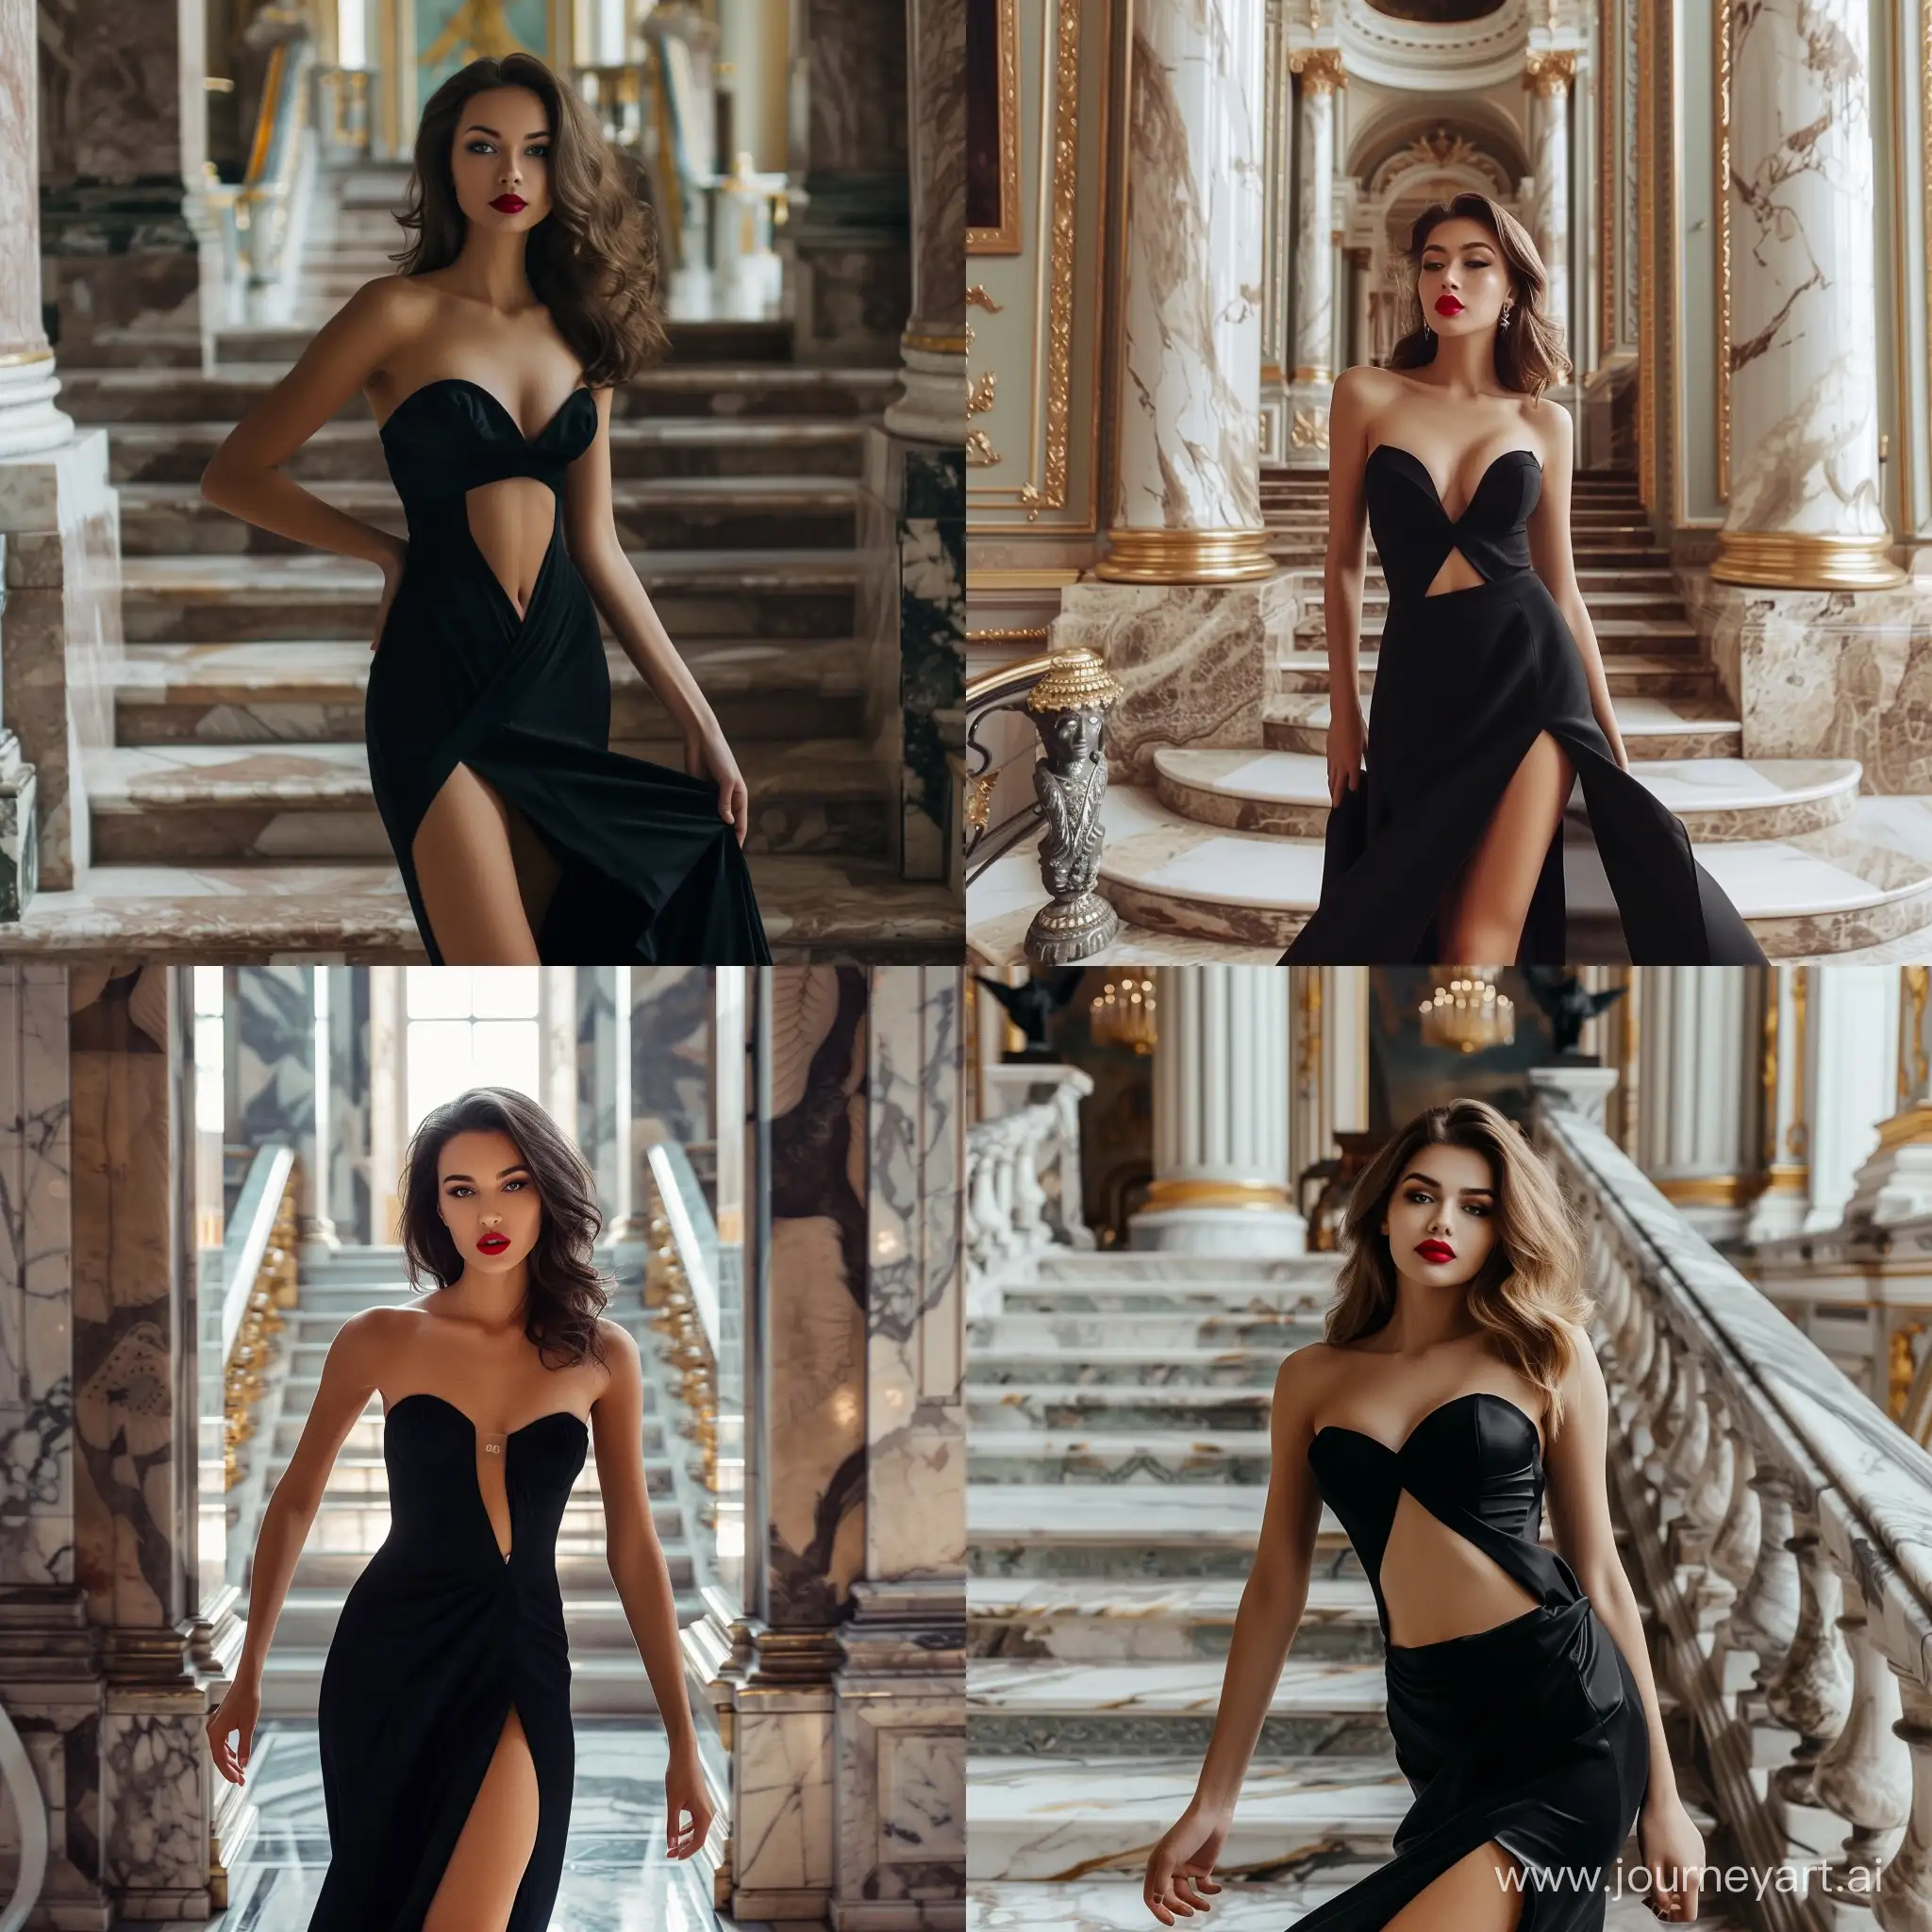 ((hour glass physique)), brunette model that dose not exist in real life, walking down a marble staircase, cherry lips, Saint Petersburg opera, black dress with slit, Pinterest